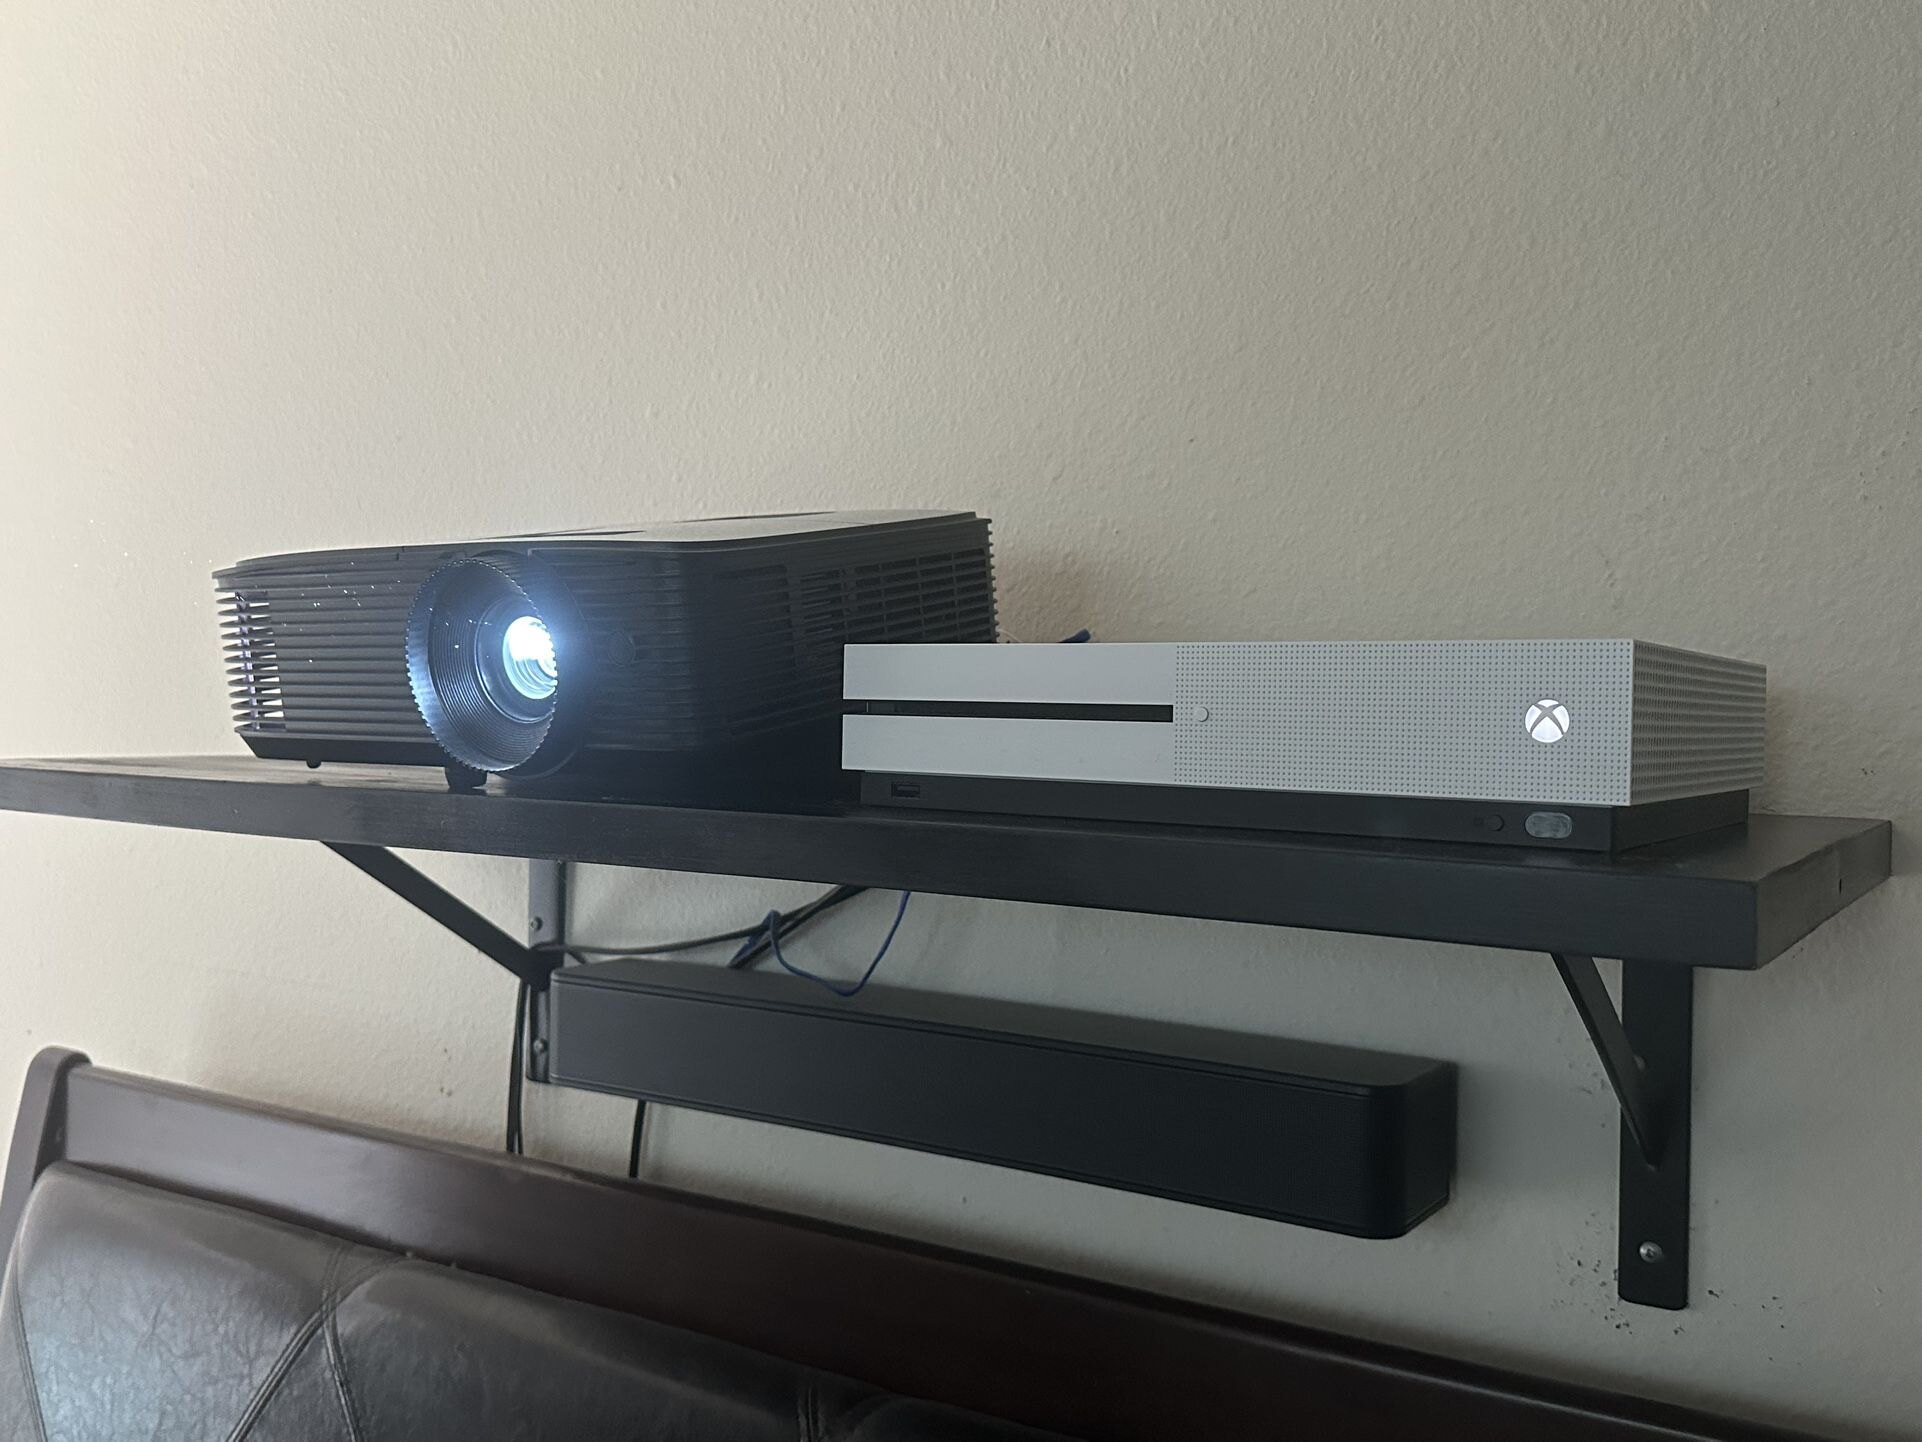 How To Connect Xbox One To Projector